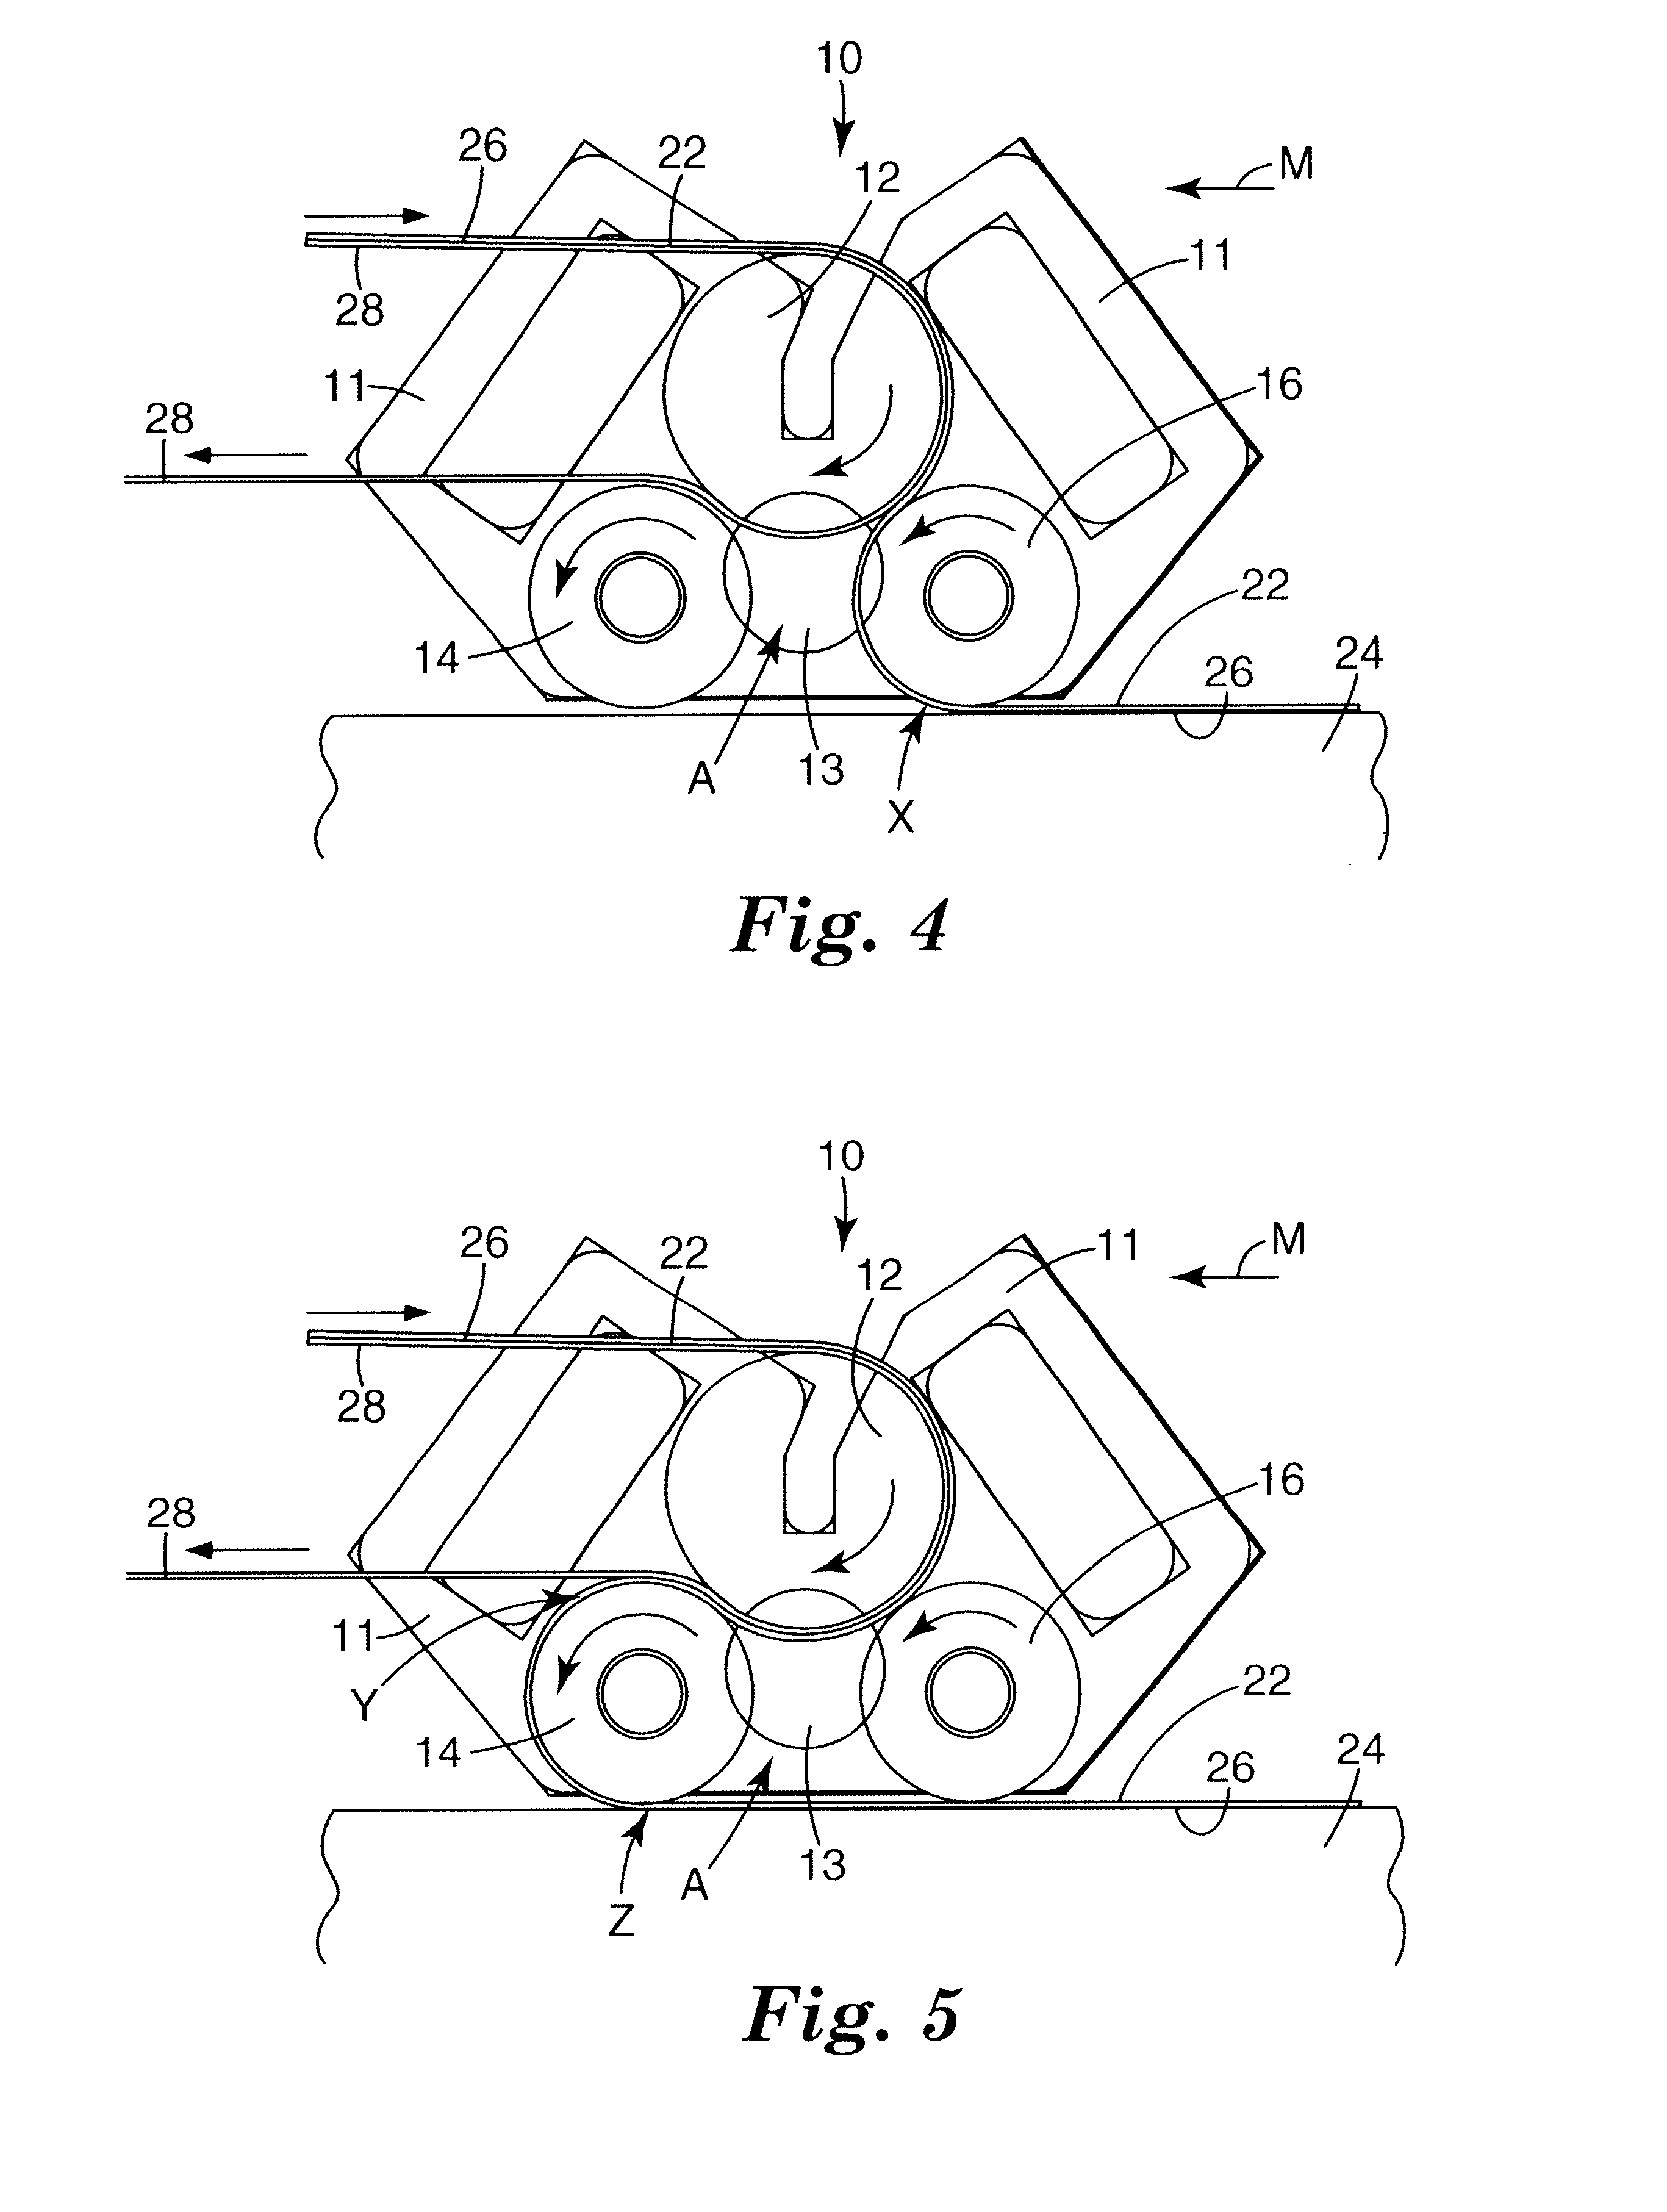 Film lamination and removal system and methods of use